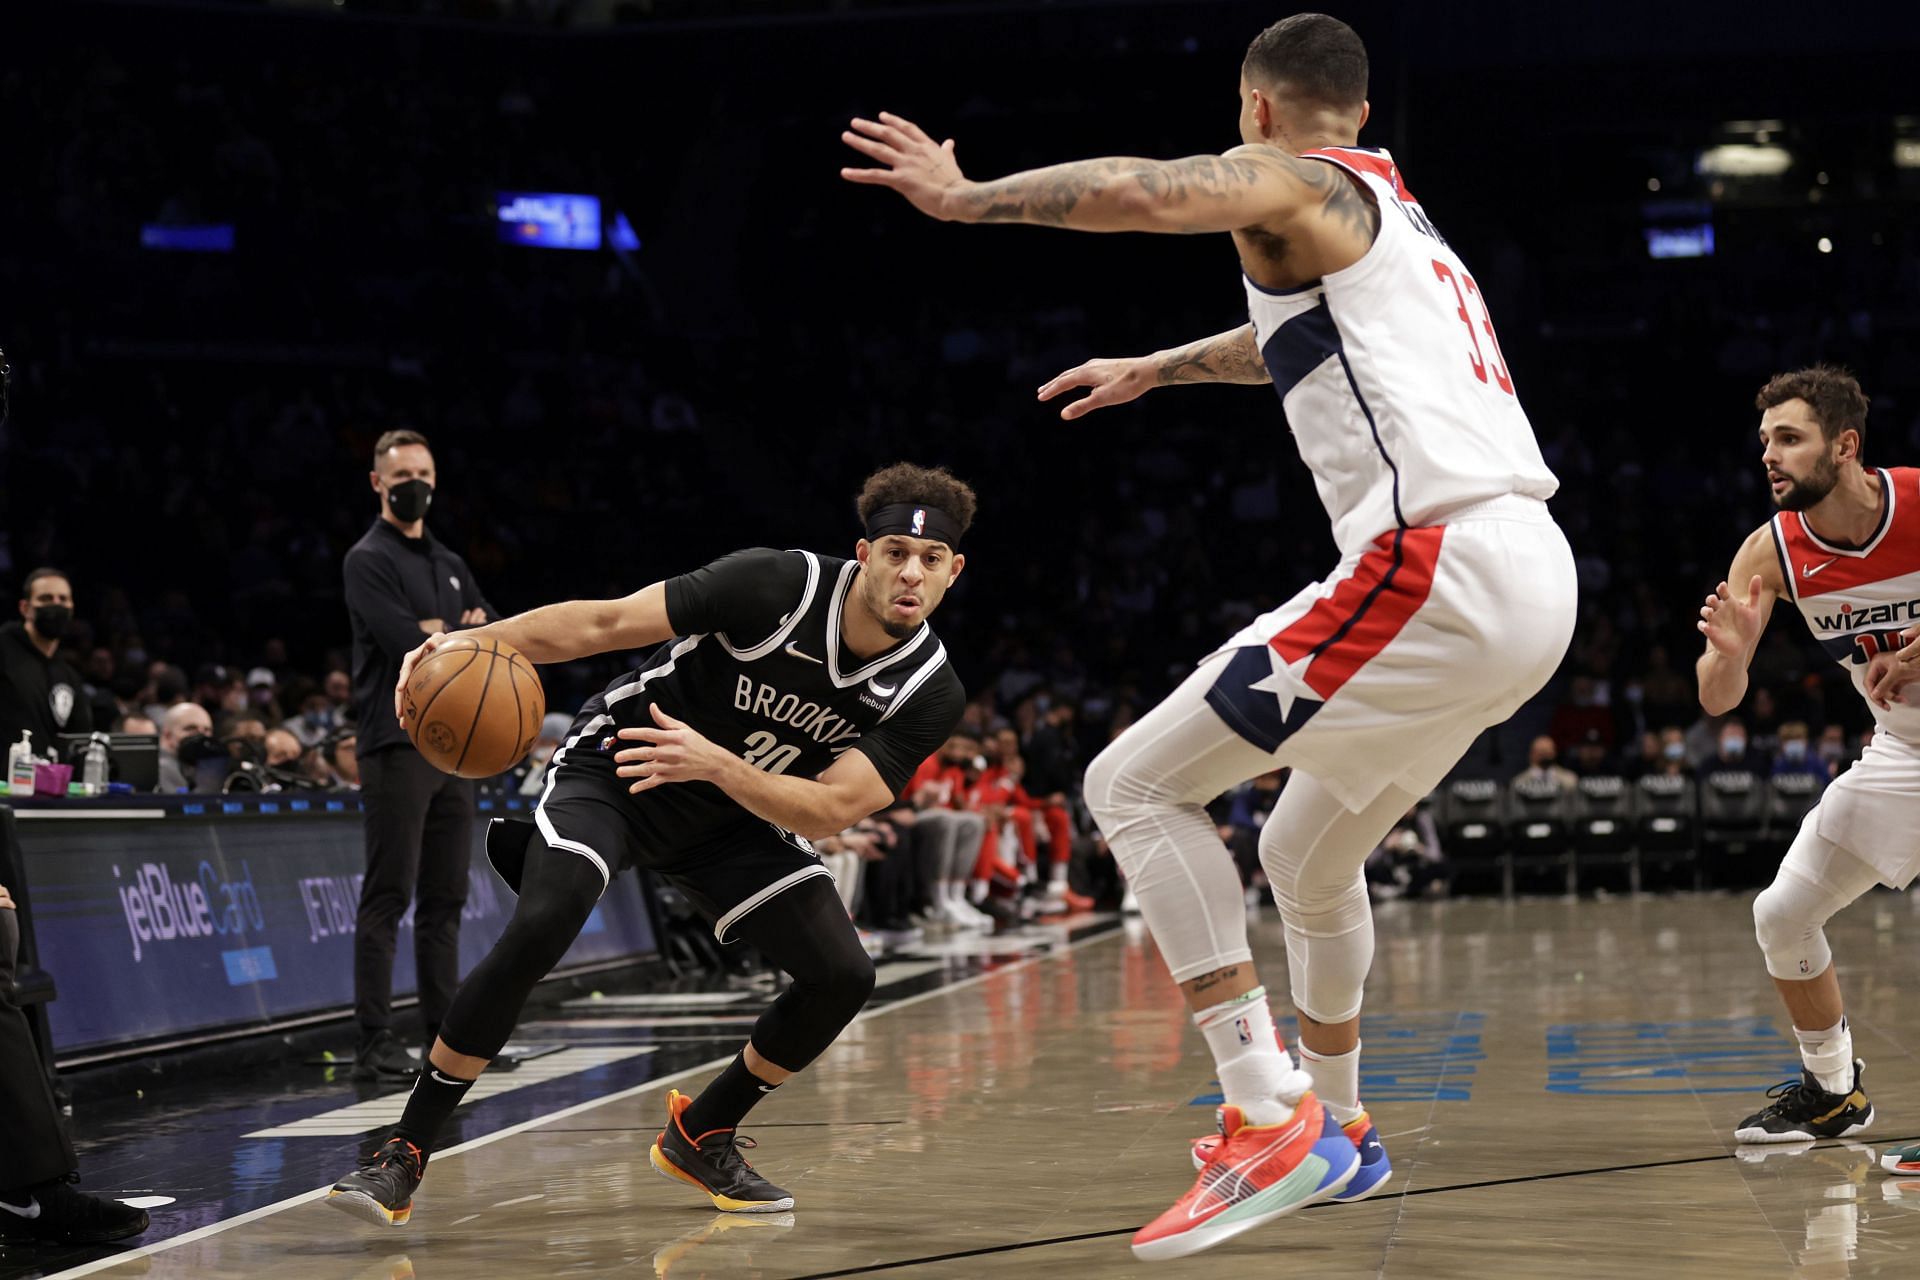 Seth Curry #30 of the Brooklyn Nets drives past Kyle Kuzma #33 of the Washington Wizards during the first half at Barclays Center on February 17, 2022 in New York City